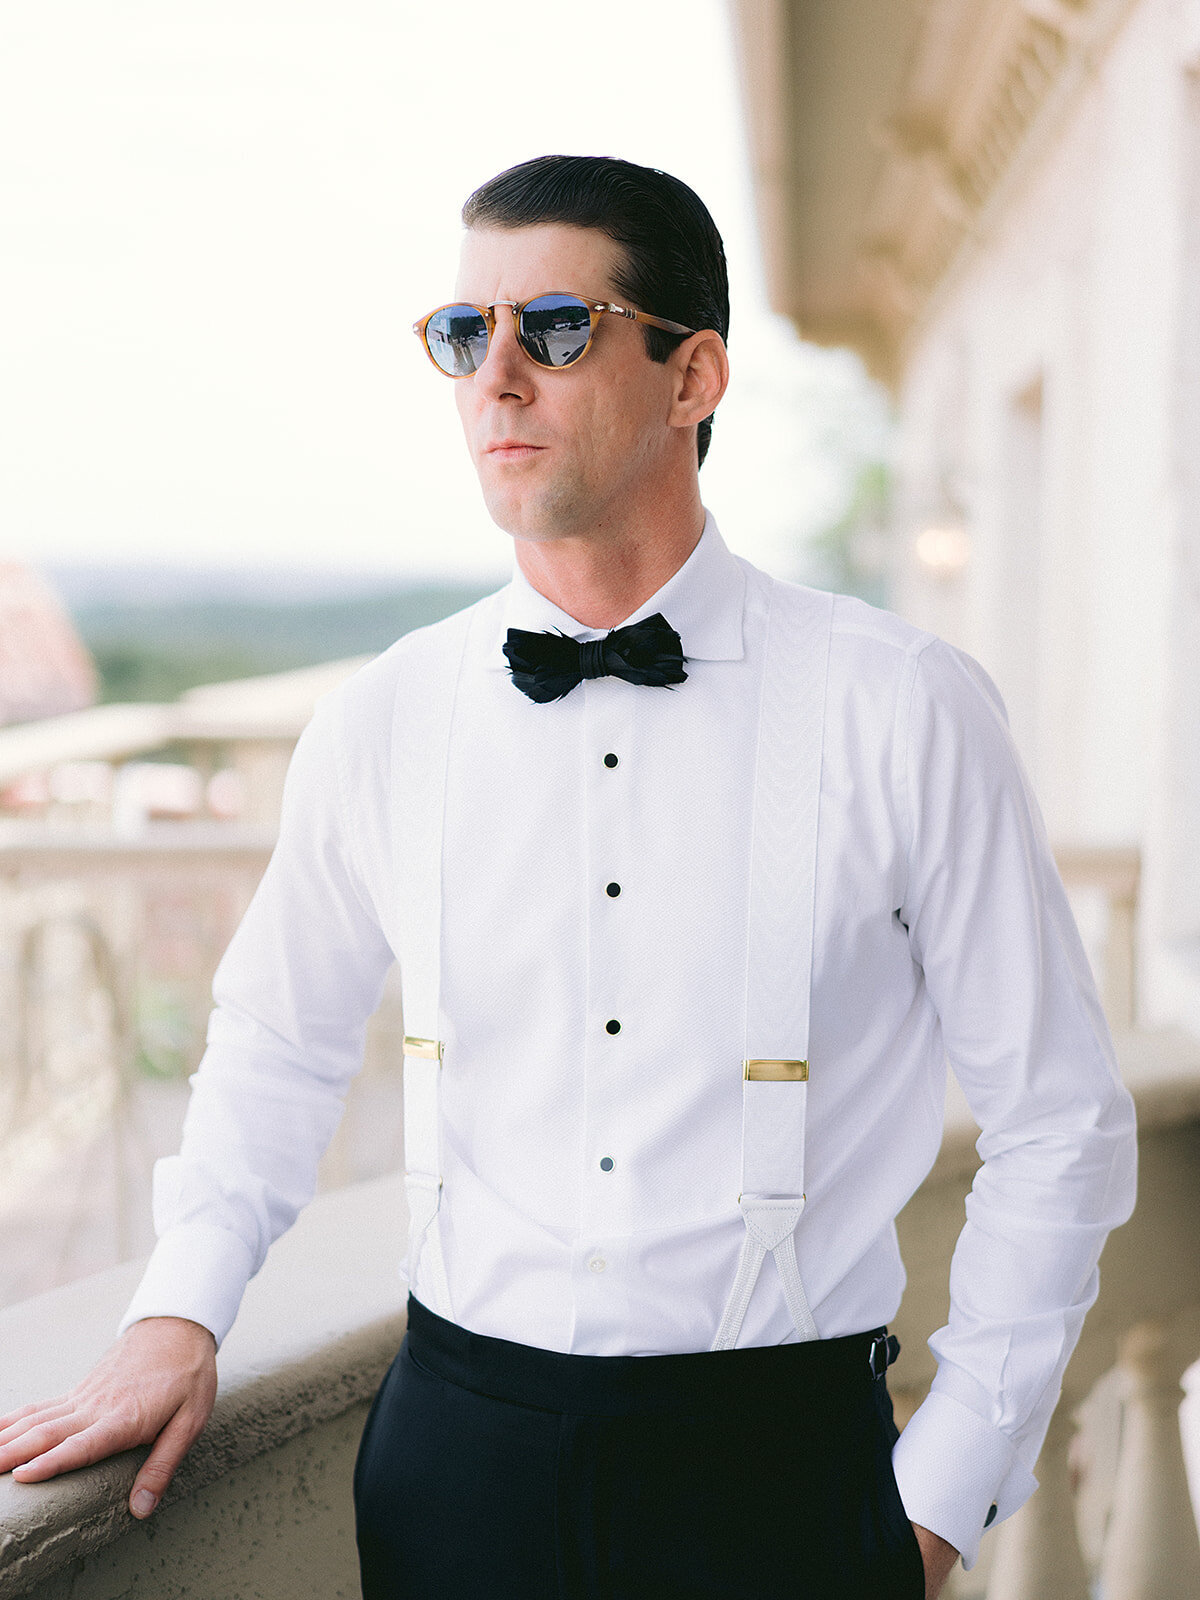 The groom poses on the balcony of the groom's suite at Villa Antonia, wearing sunglasses